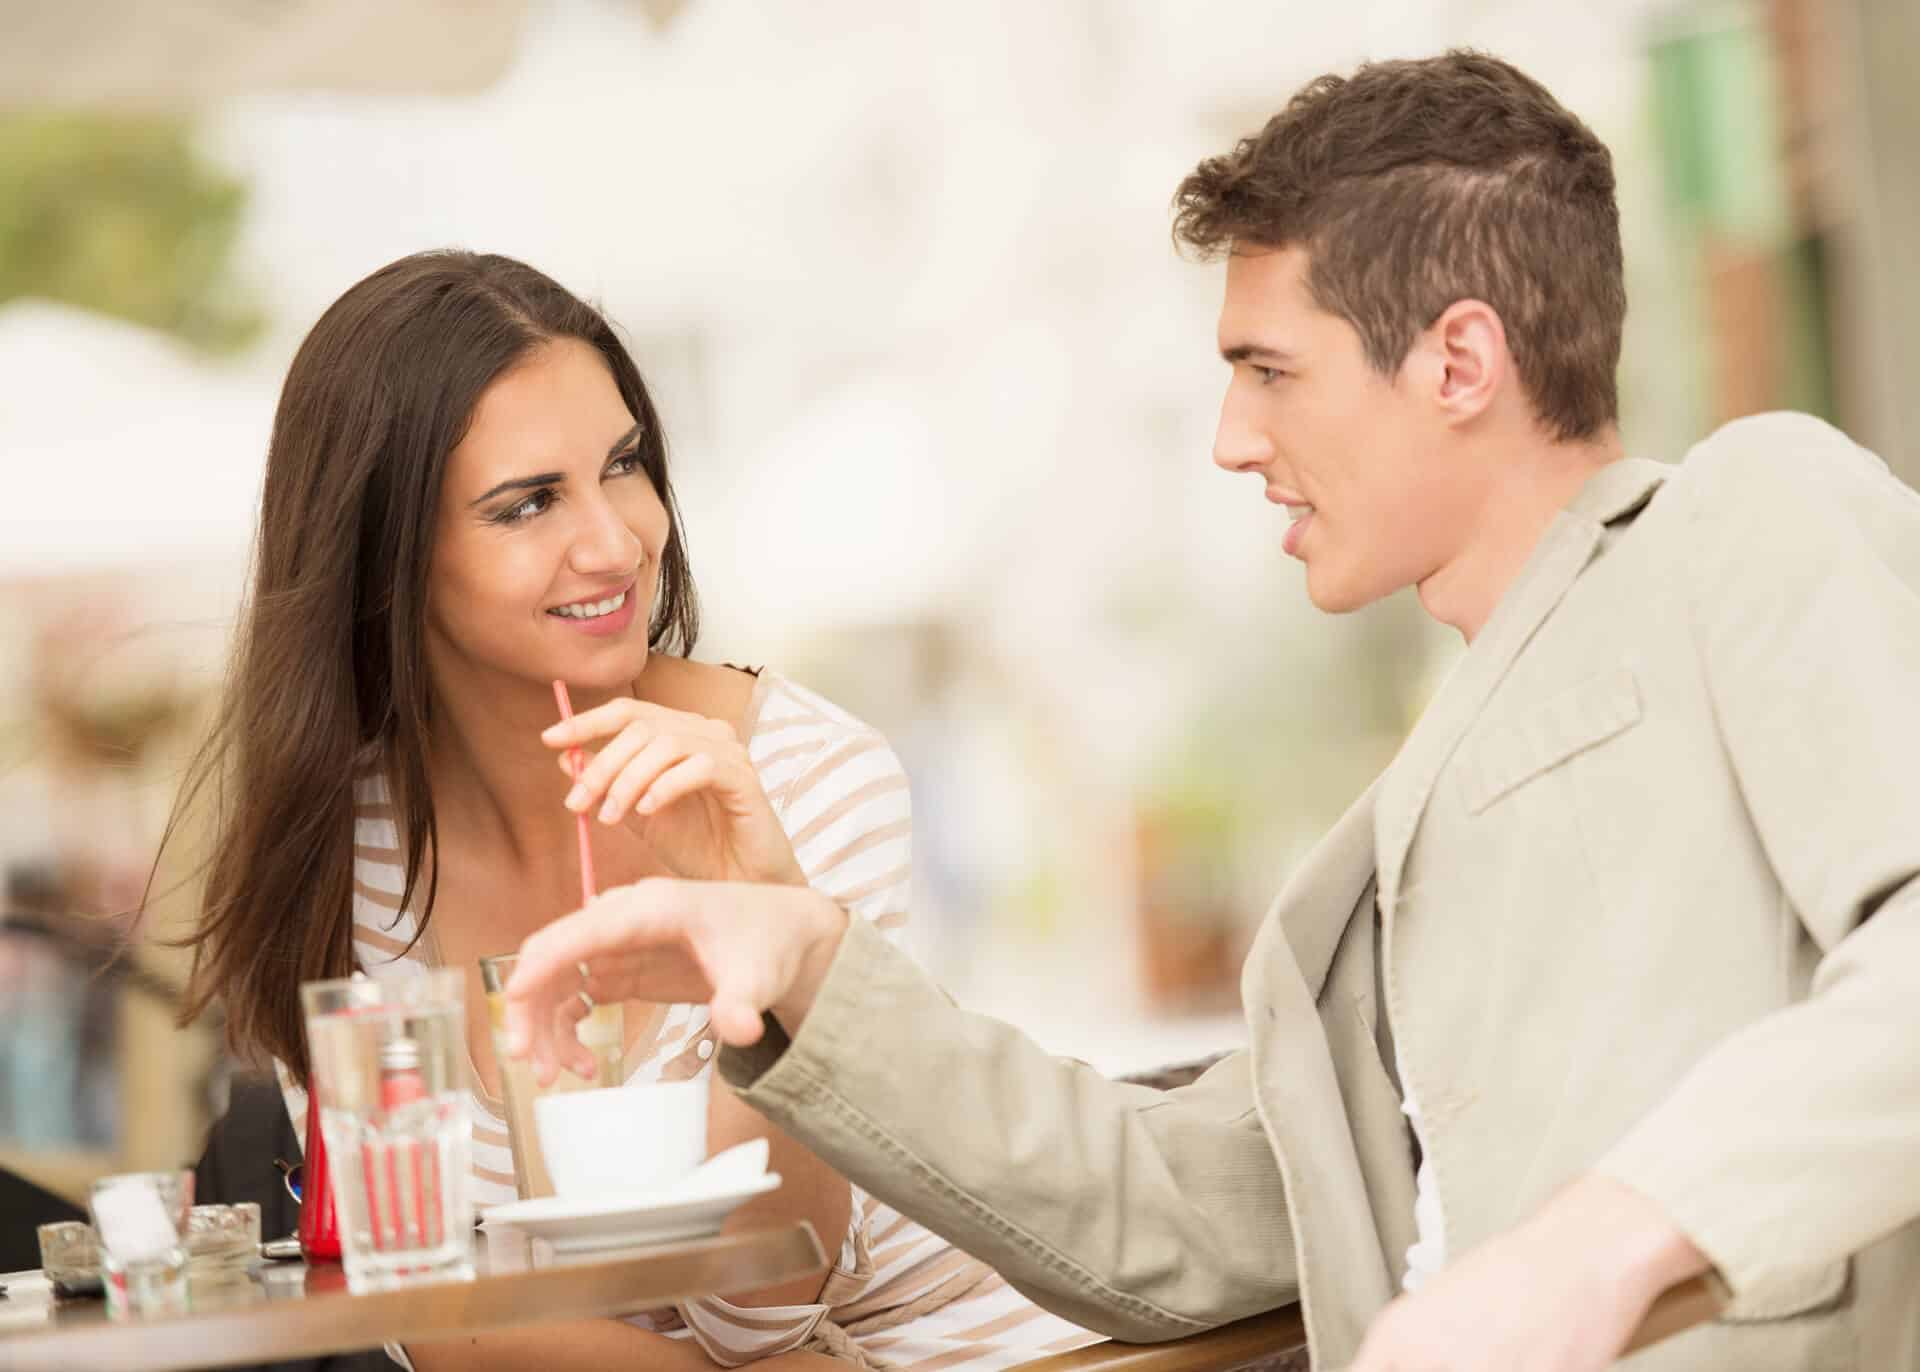 man flirting with a woman in a cafe